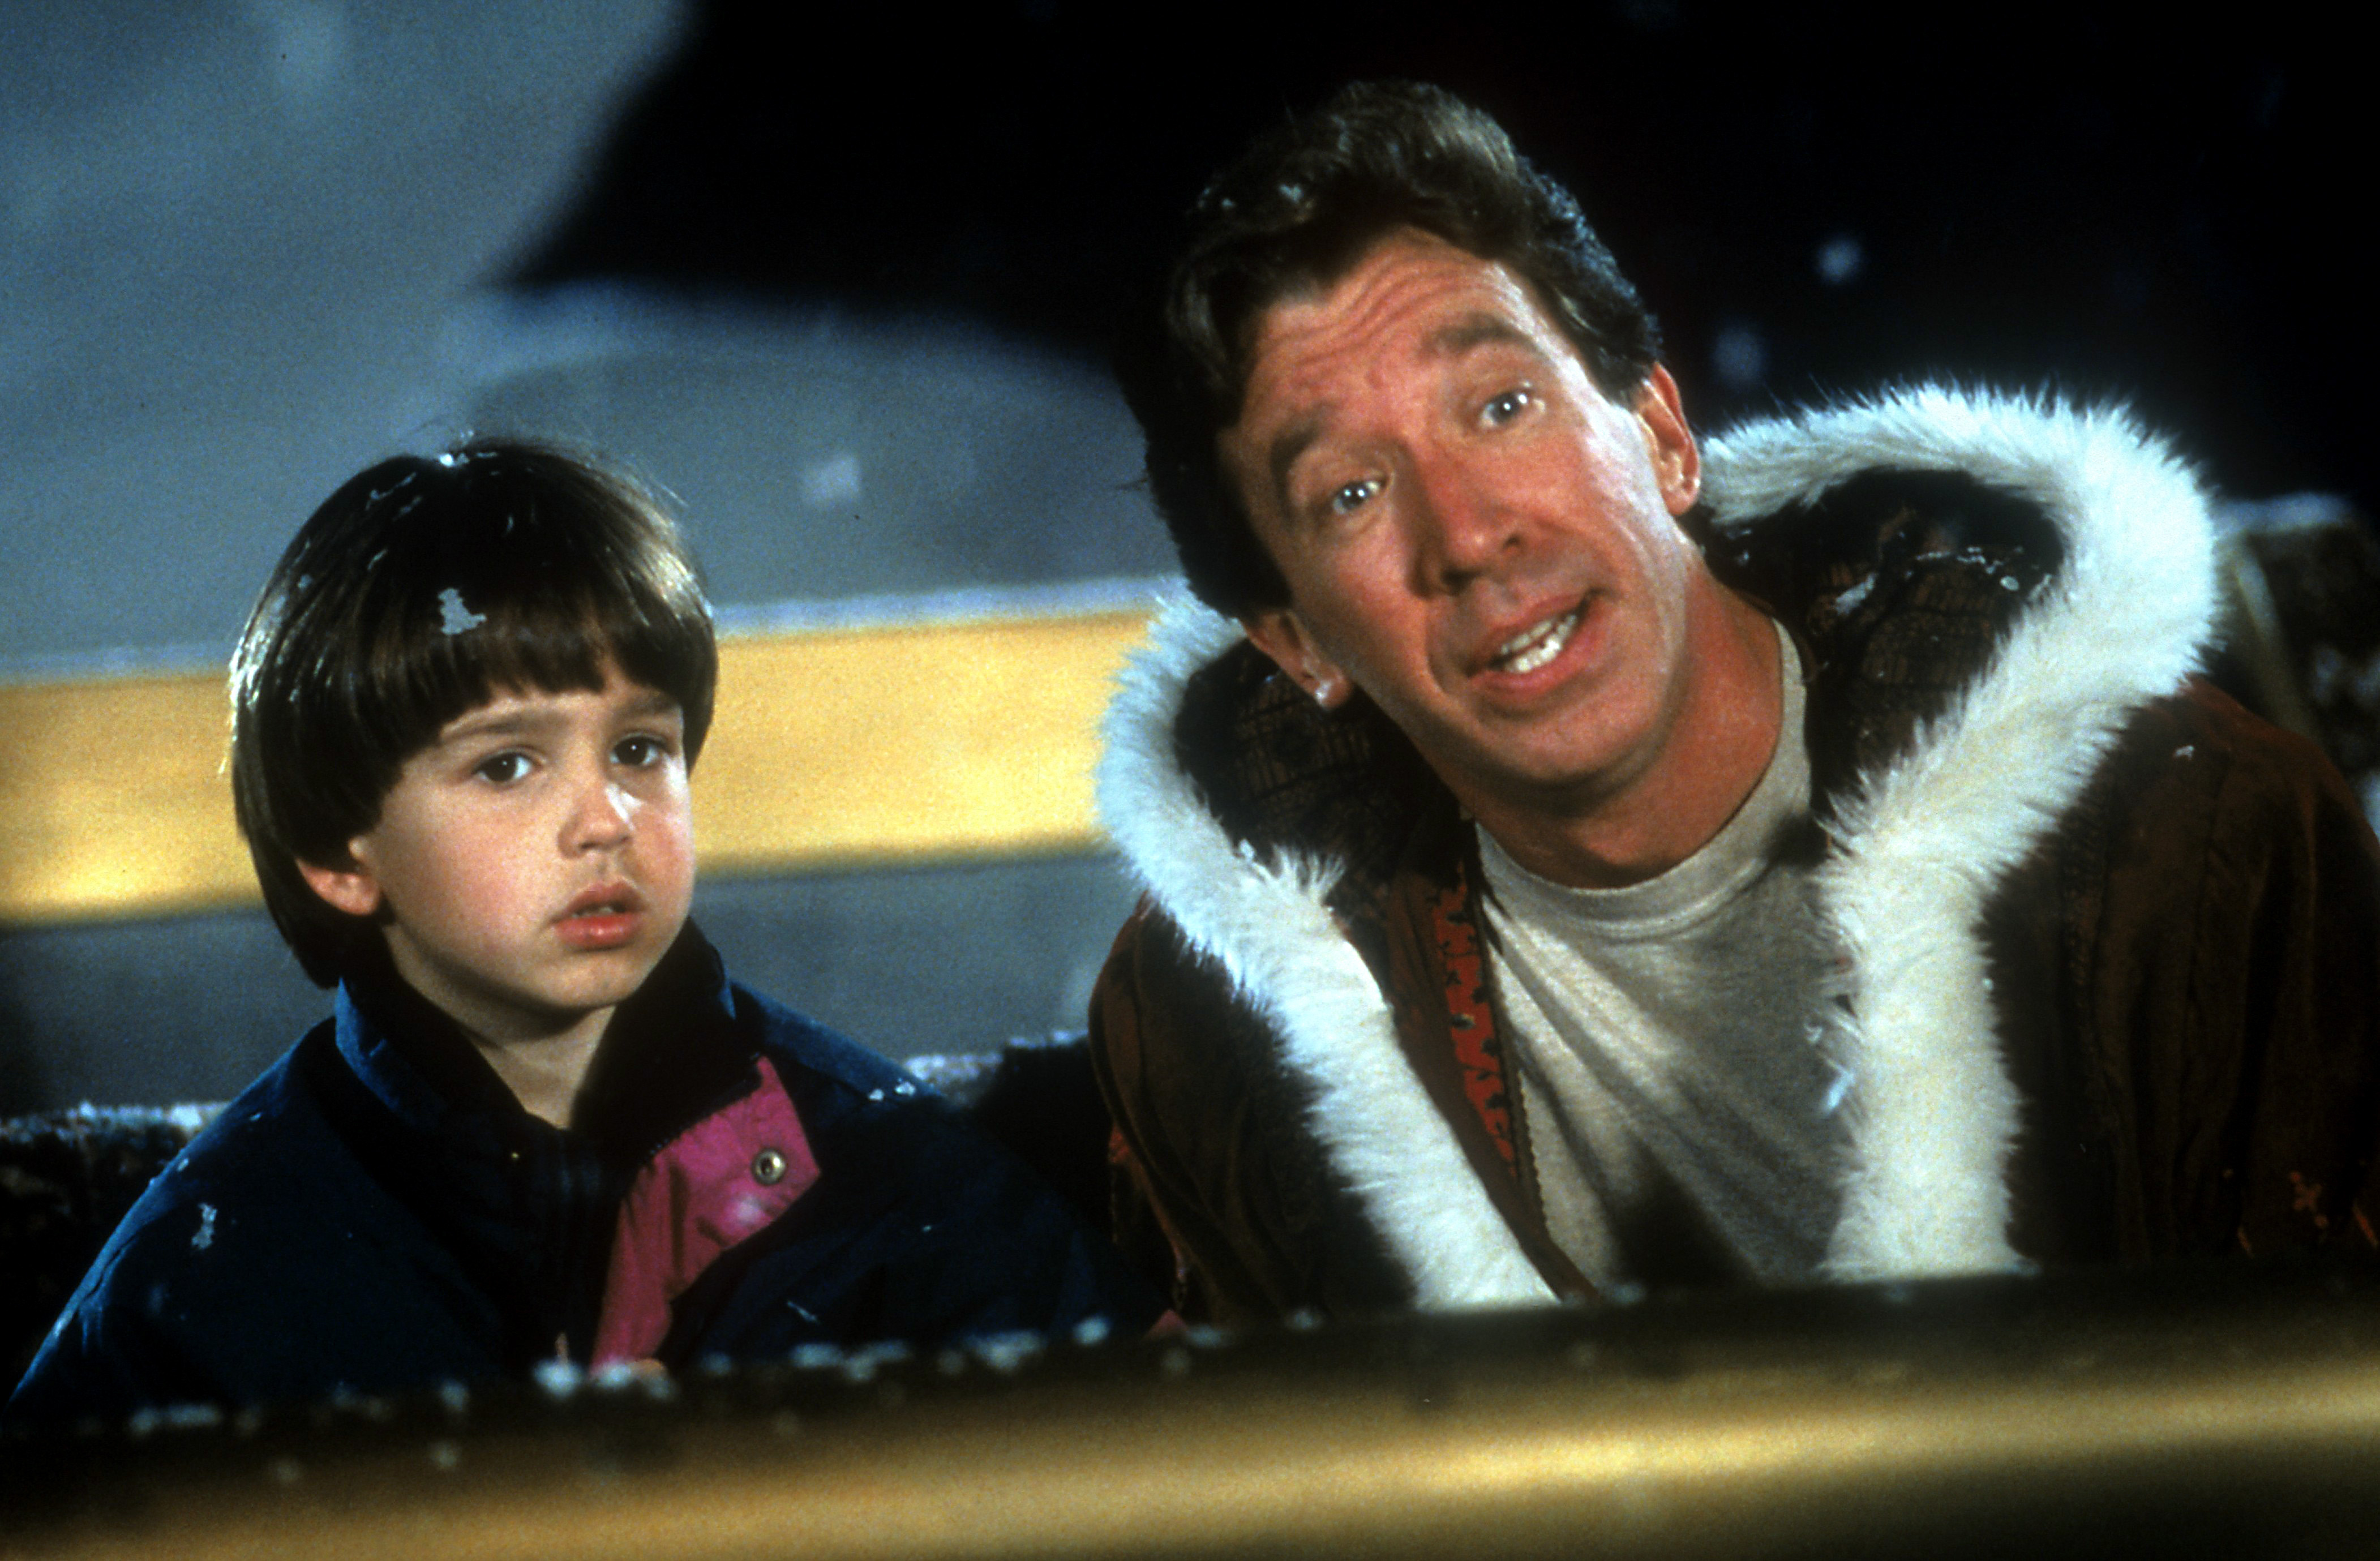 Tim Allen with a child in a scene from the film 'The Santa Clause'